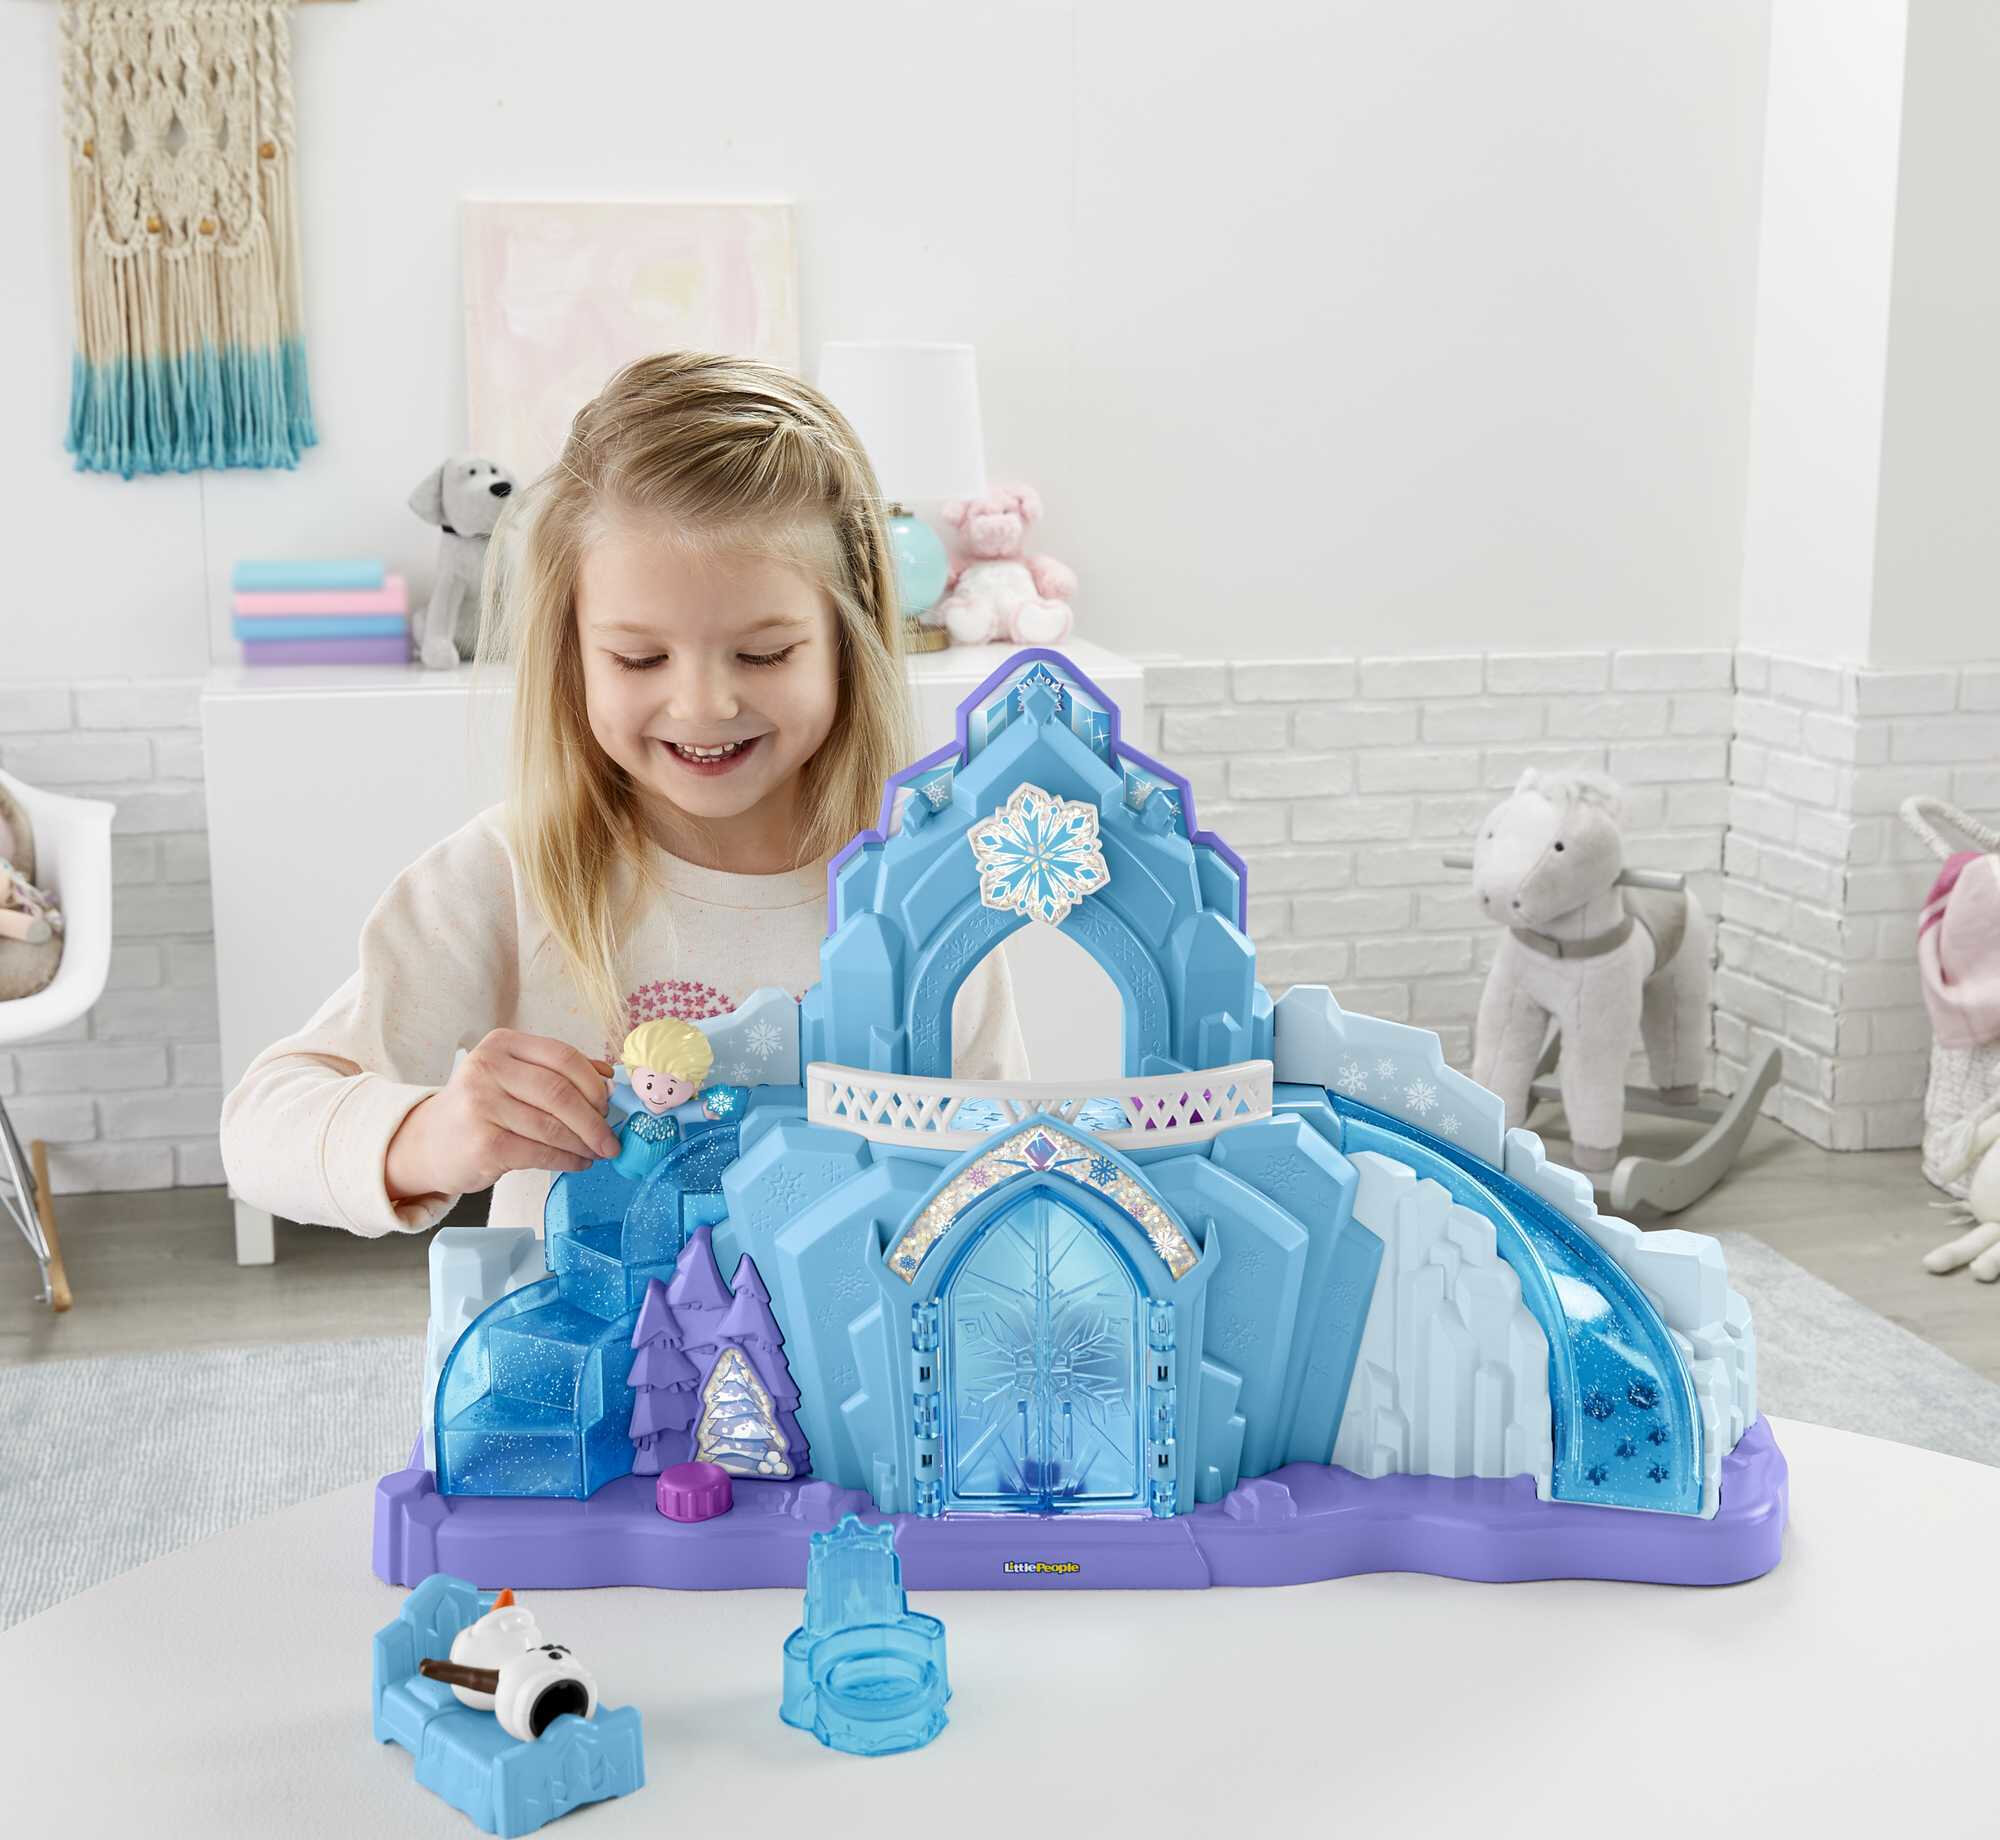 Disney Frozen Elsa’s Ice Palace Little People Toddler Musical Playset with Elsa & Olaf Figures - image 3 of 7